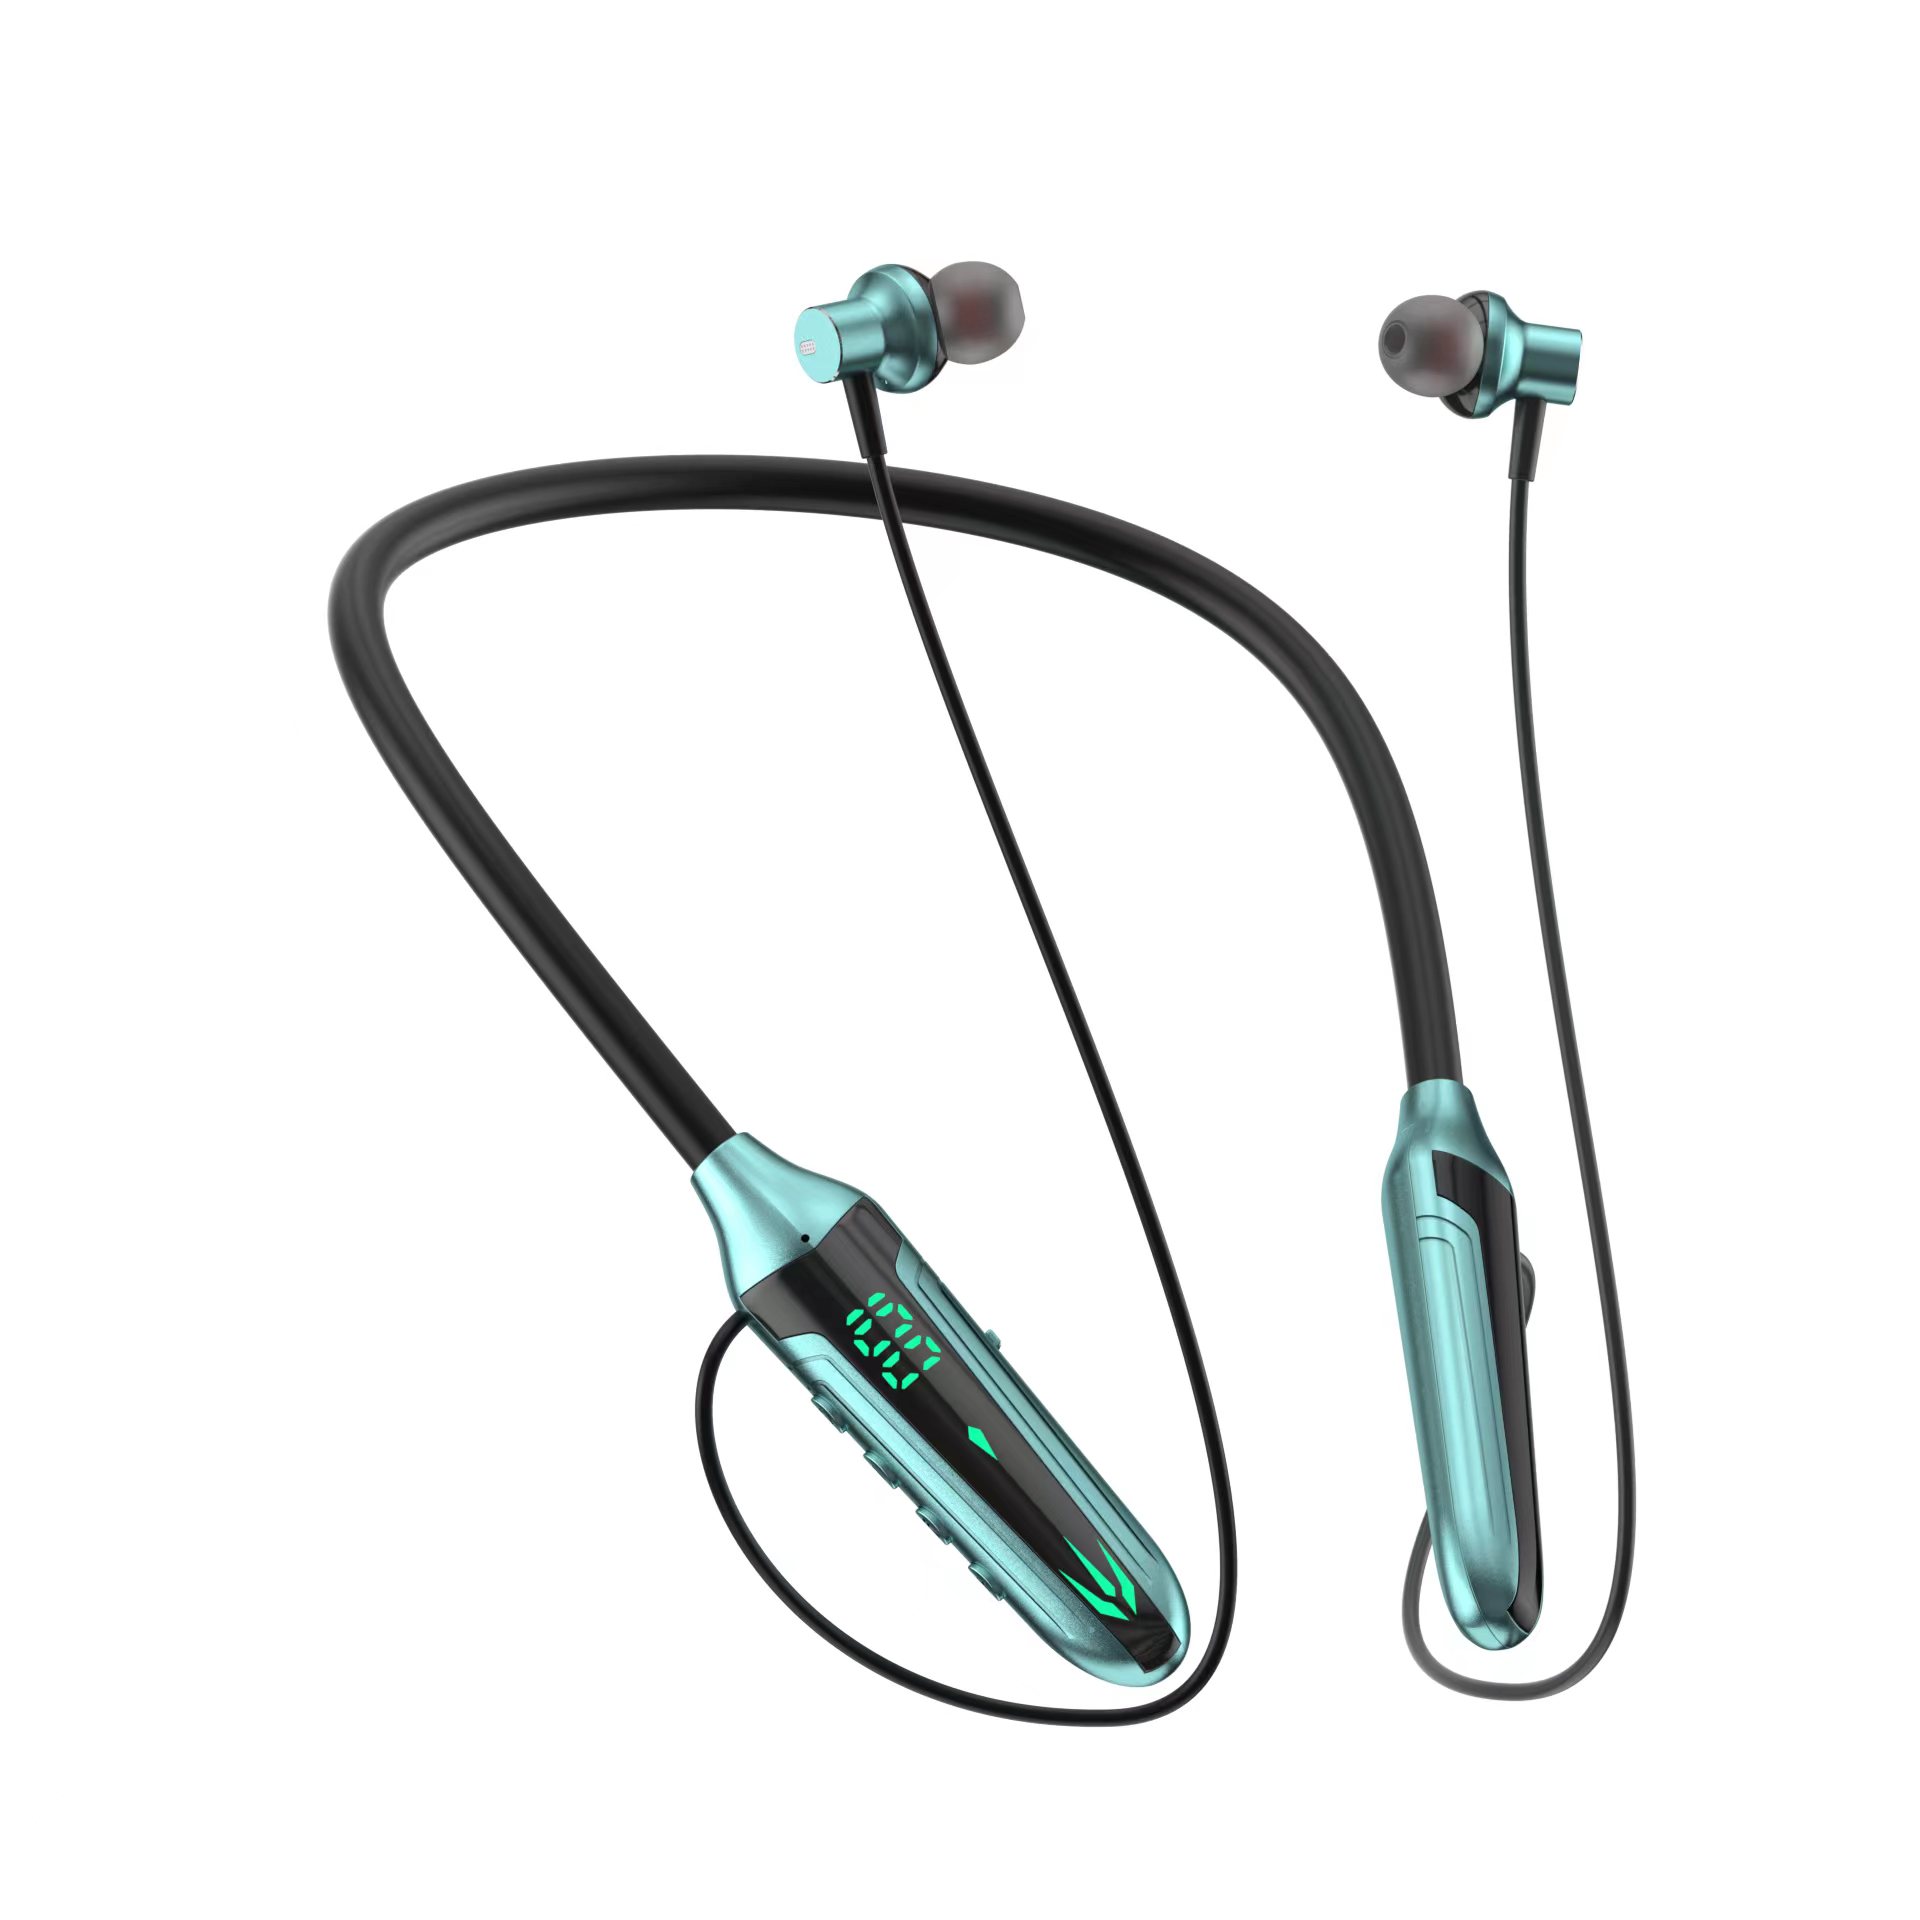 BT neckband earbuds with lights for gaming and sports F23